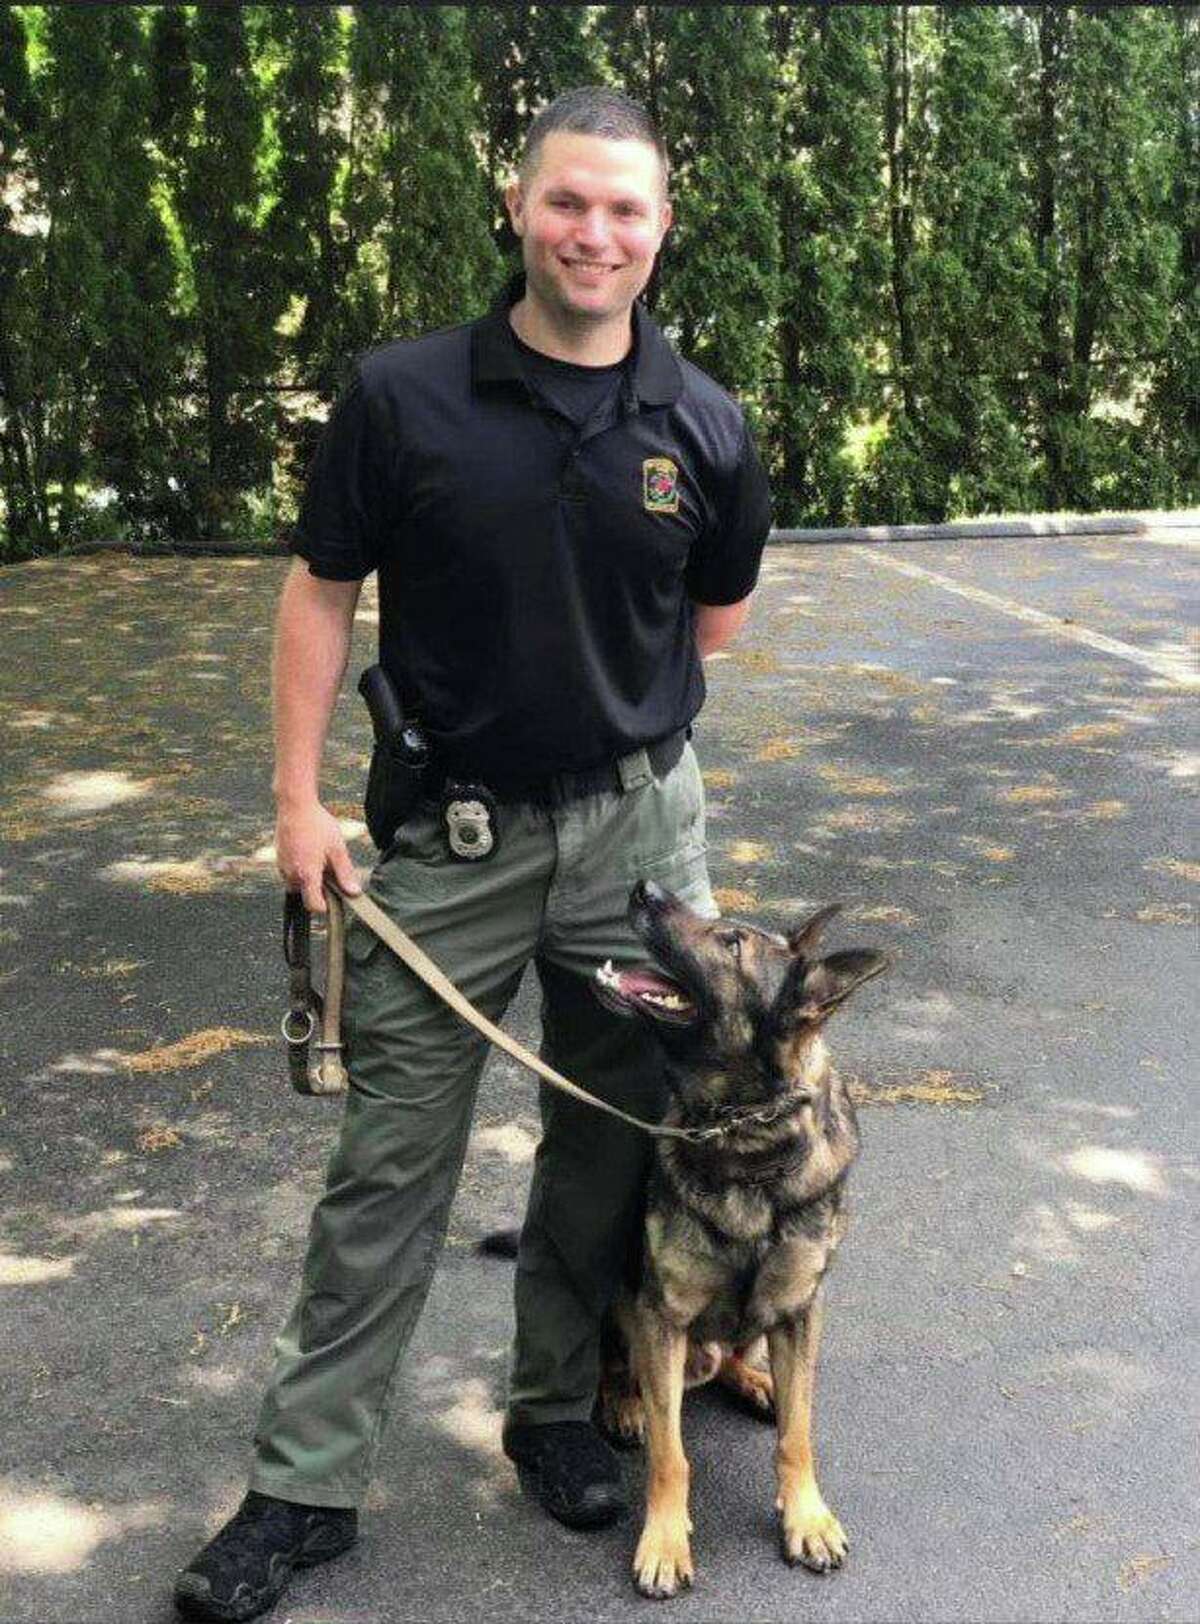 Officer First Class Ken Wright and K-9 Officer Ozzy. Ozzy suffered a medical emergency and died Saturday, according to the Norwich Police Department.